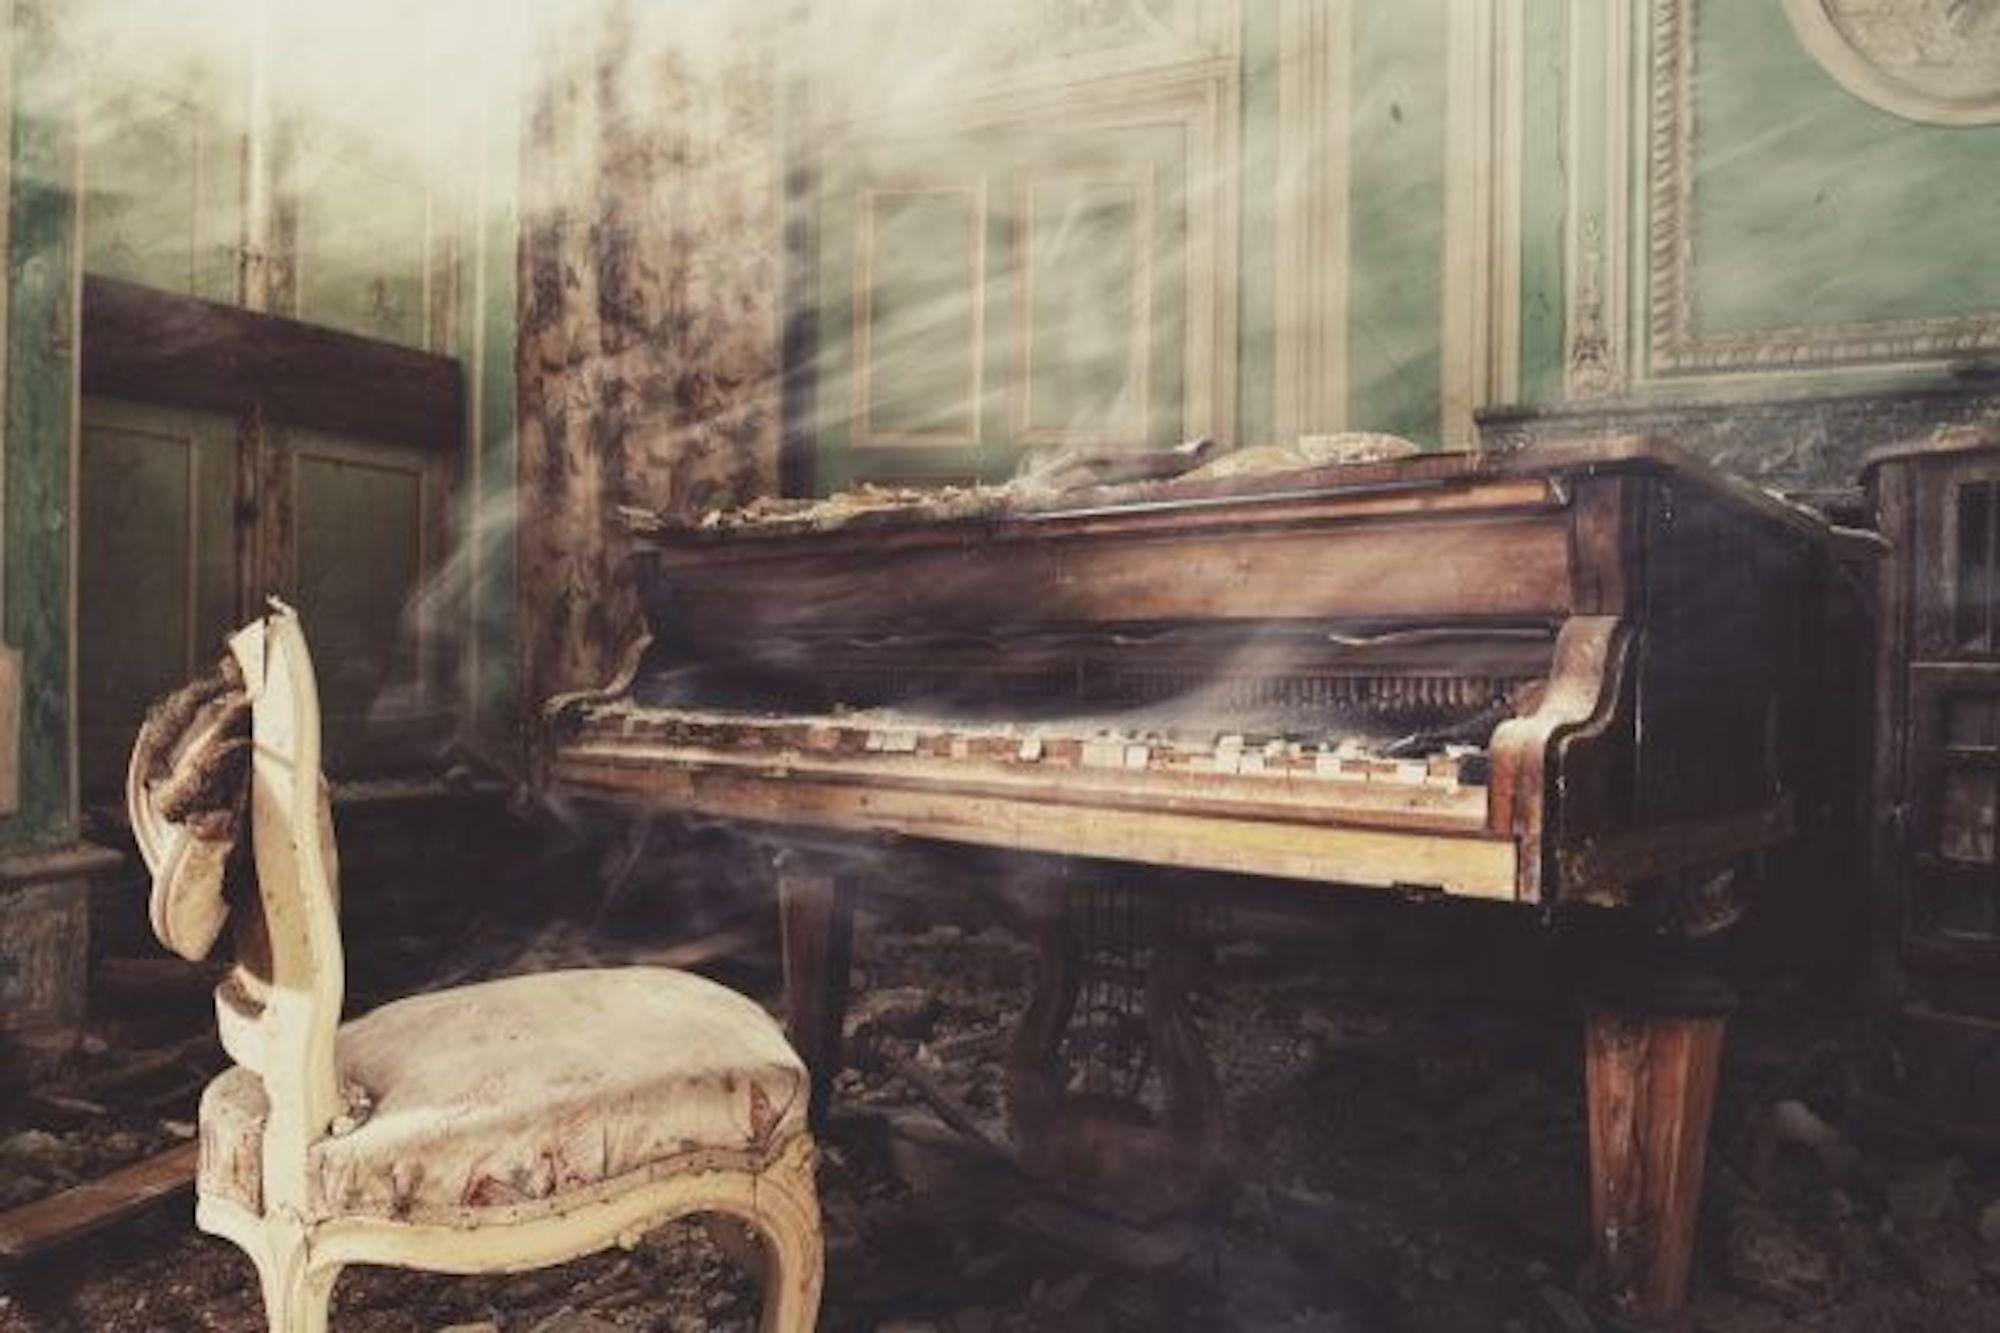 Castle Piano is a limited-edition photograph by contemporary artist Gina Soden. It is part of the “Emergence” series.

This photograph is sold unframed as a print only. It is available in 3 dimensions:
*44.6 × 65 cm (17.6 × 25.6 in), edition of 15